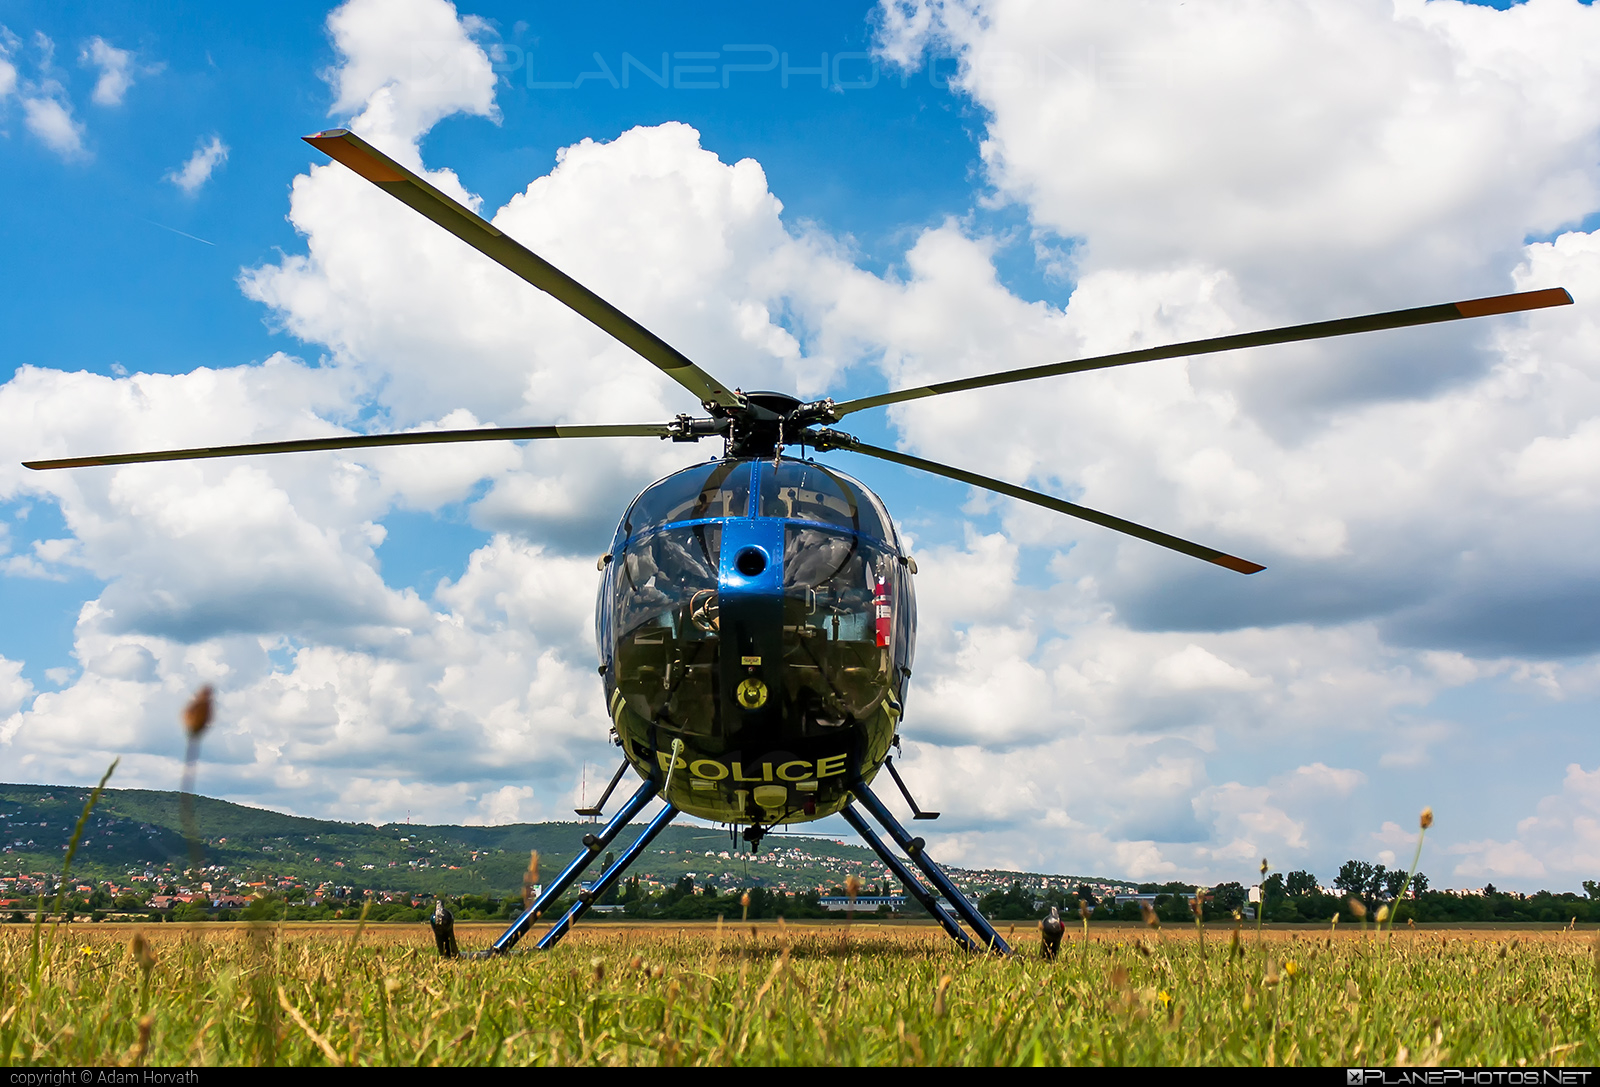 MD Helicopters MD-500E - R503 operated by Rendőrség (Hungarian Police) #hungarianpolice #mdhelicopters #rendorseg